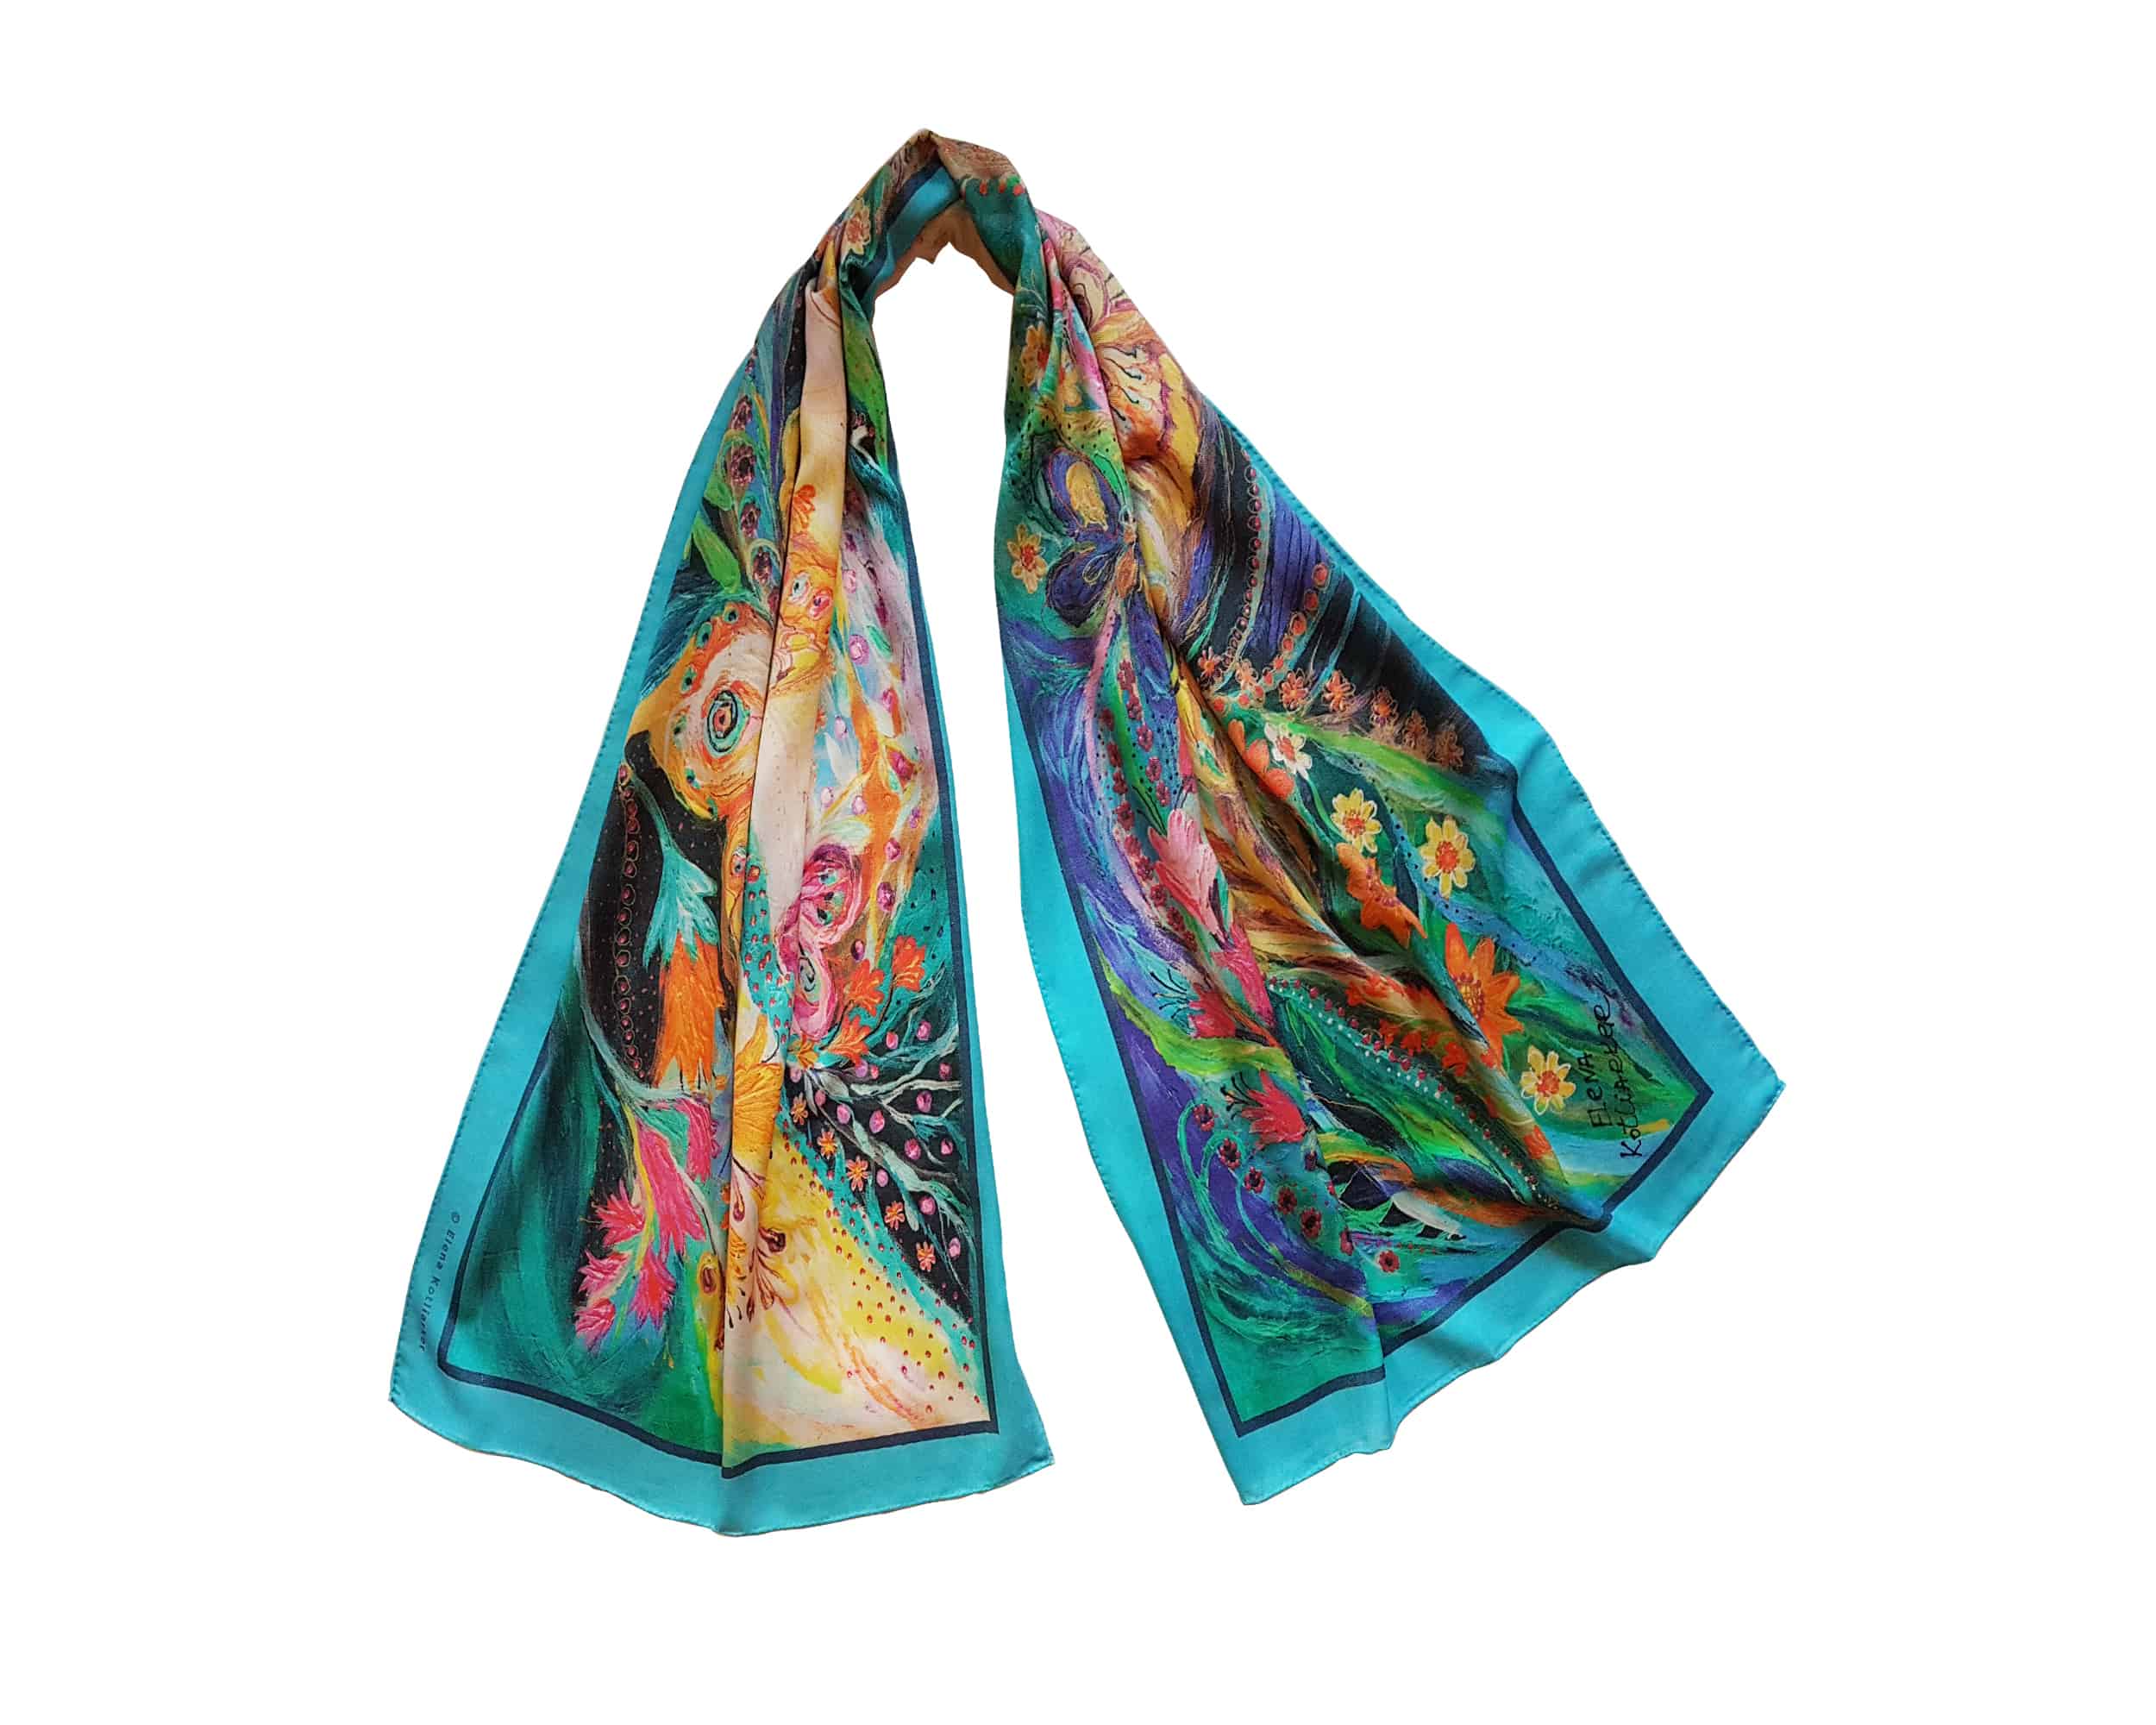 Illustrated Wool silk scarves / shawls collection gift idea